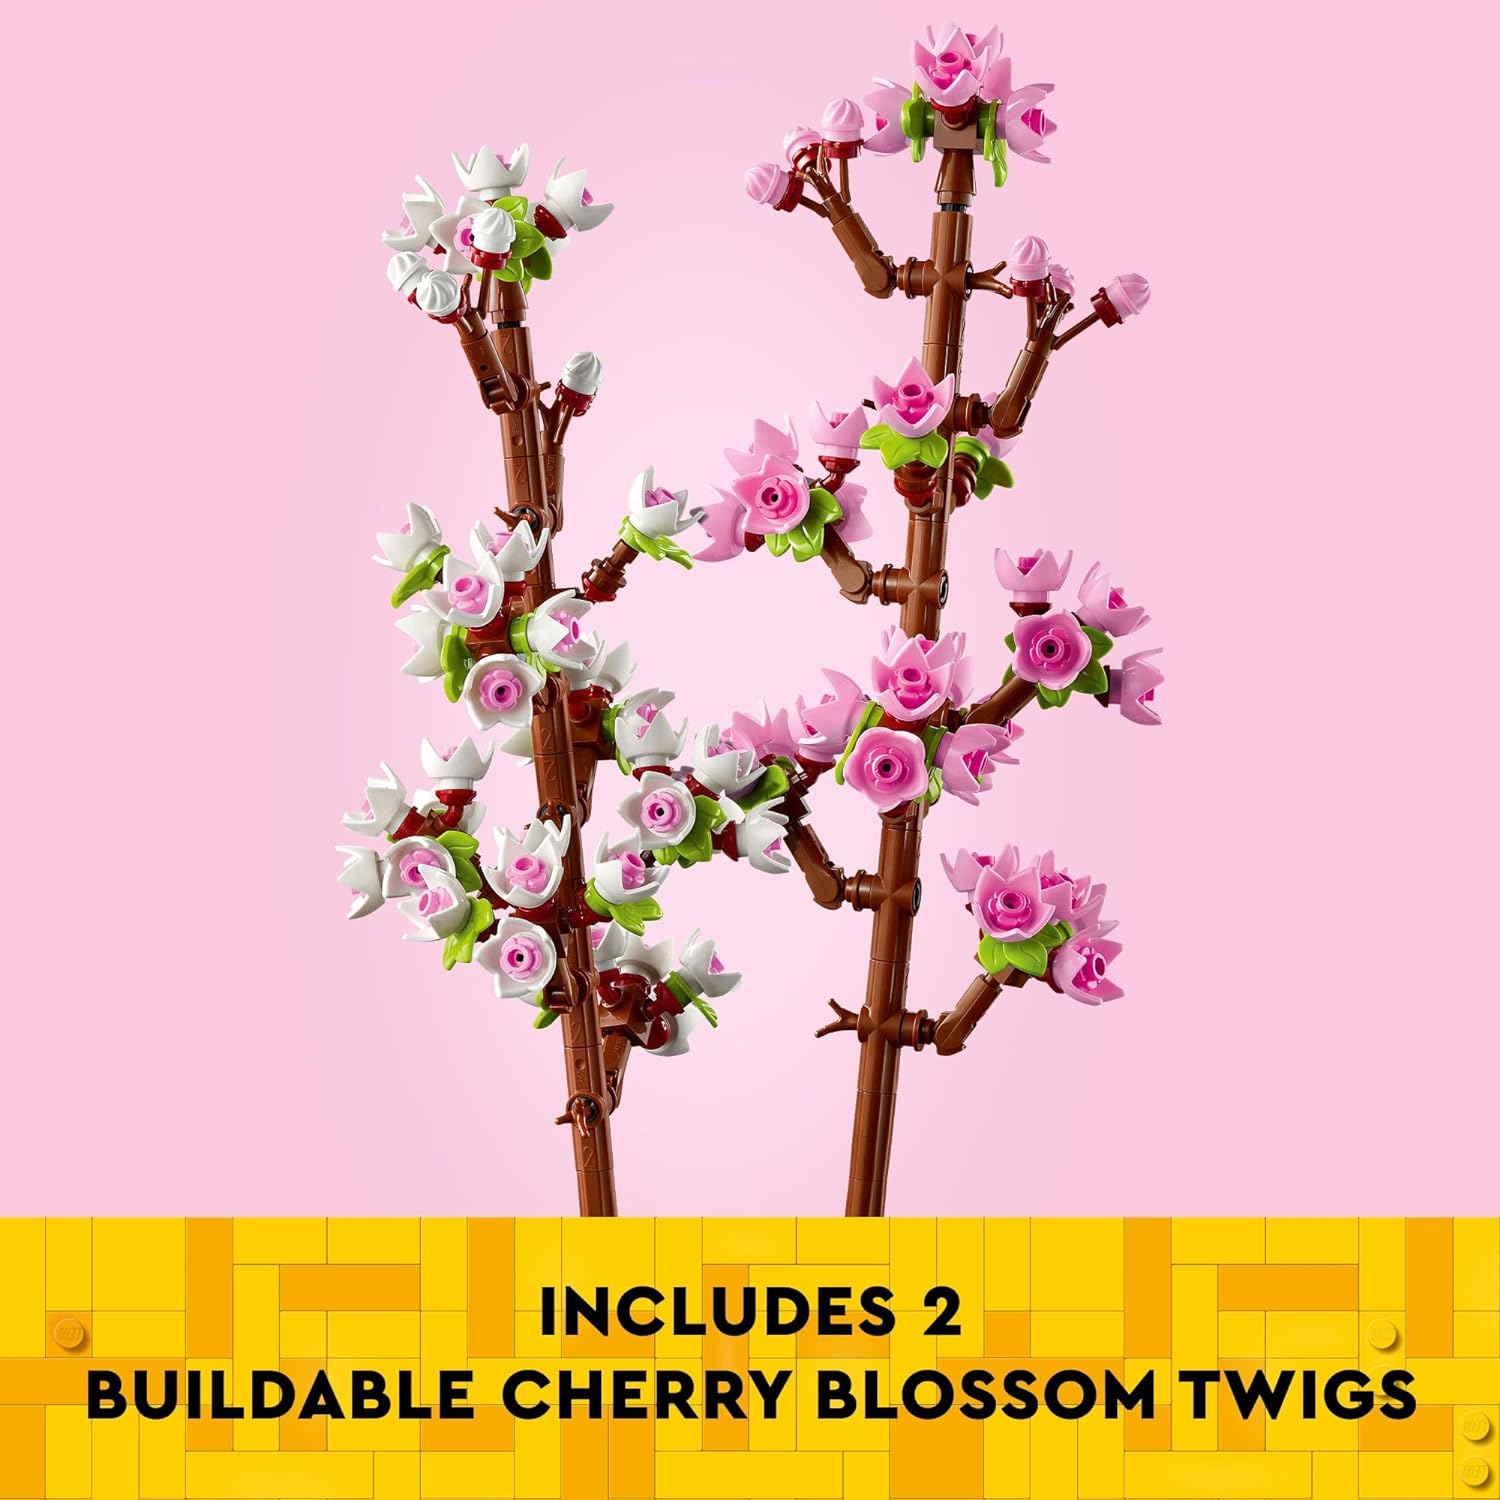 LEGO 40725 Cherry Blossoms Gift for Valentine's Day, Buildable Floral Display for Creative Kids, White and Pink Cherry Blossom.